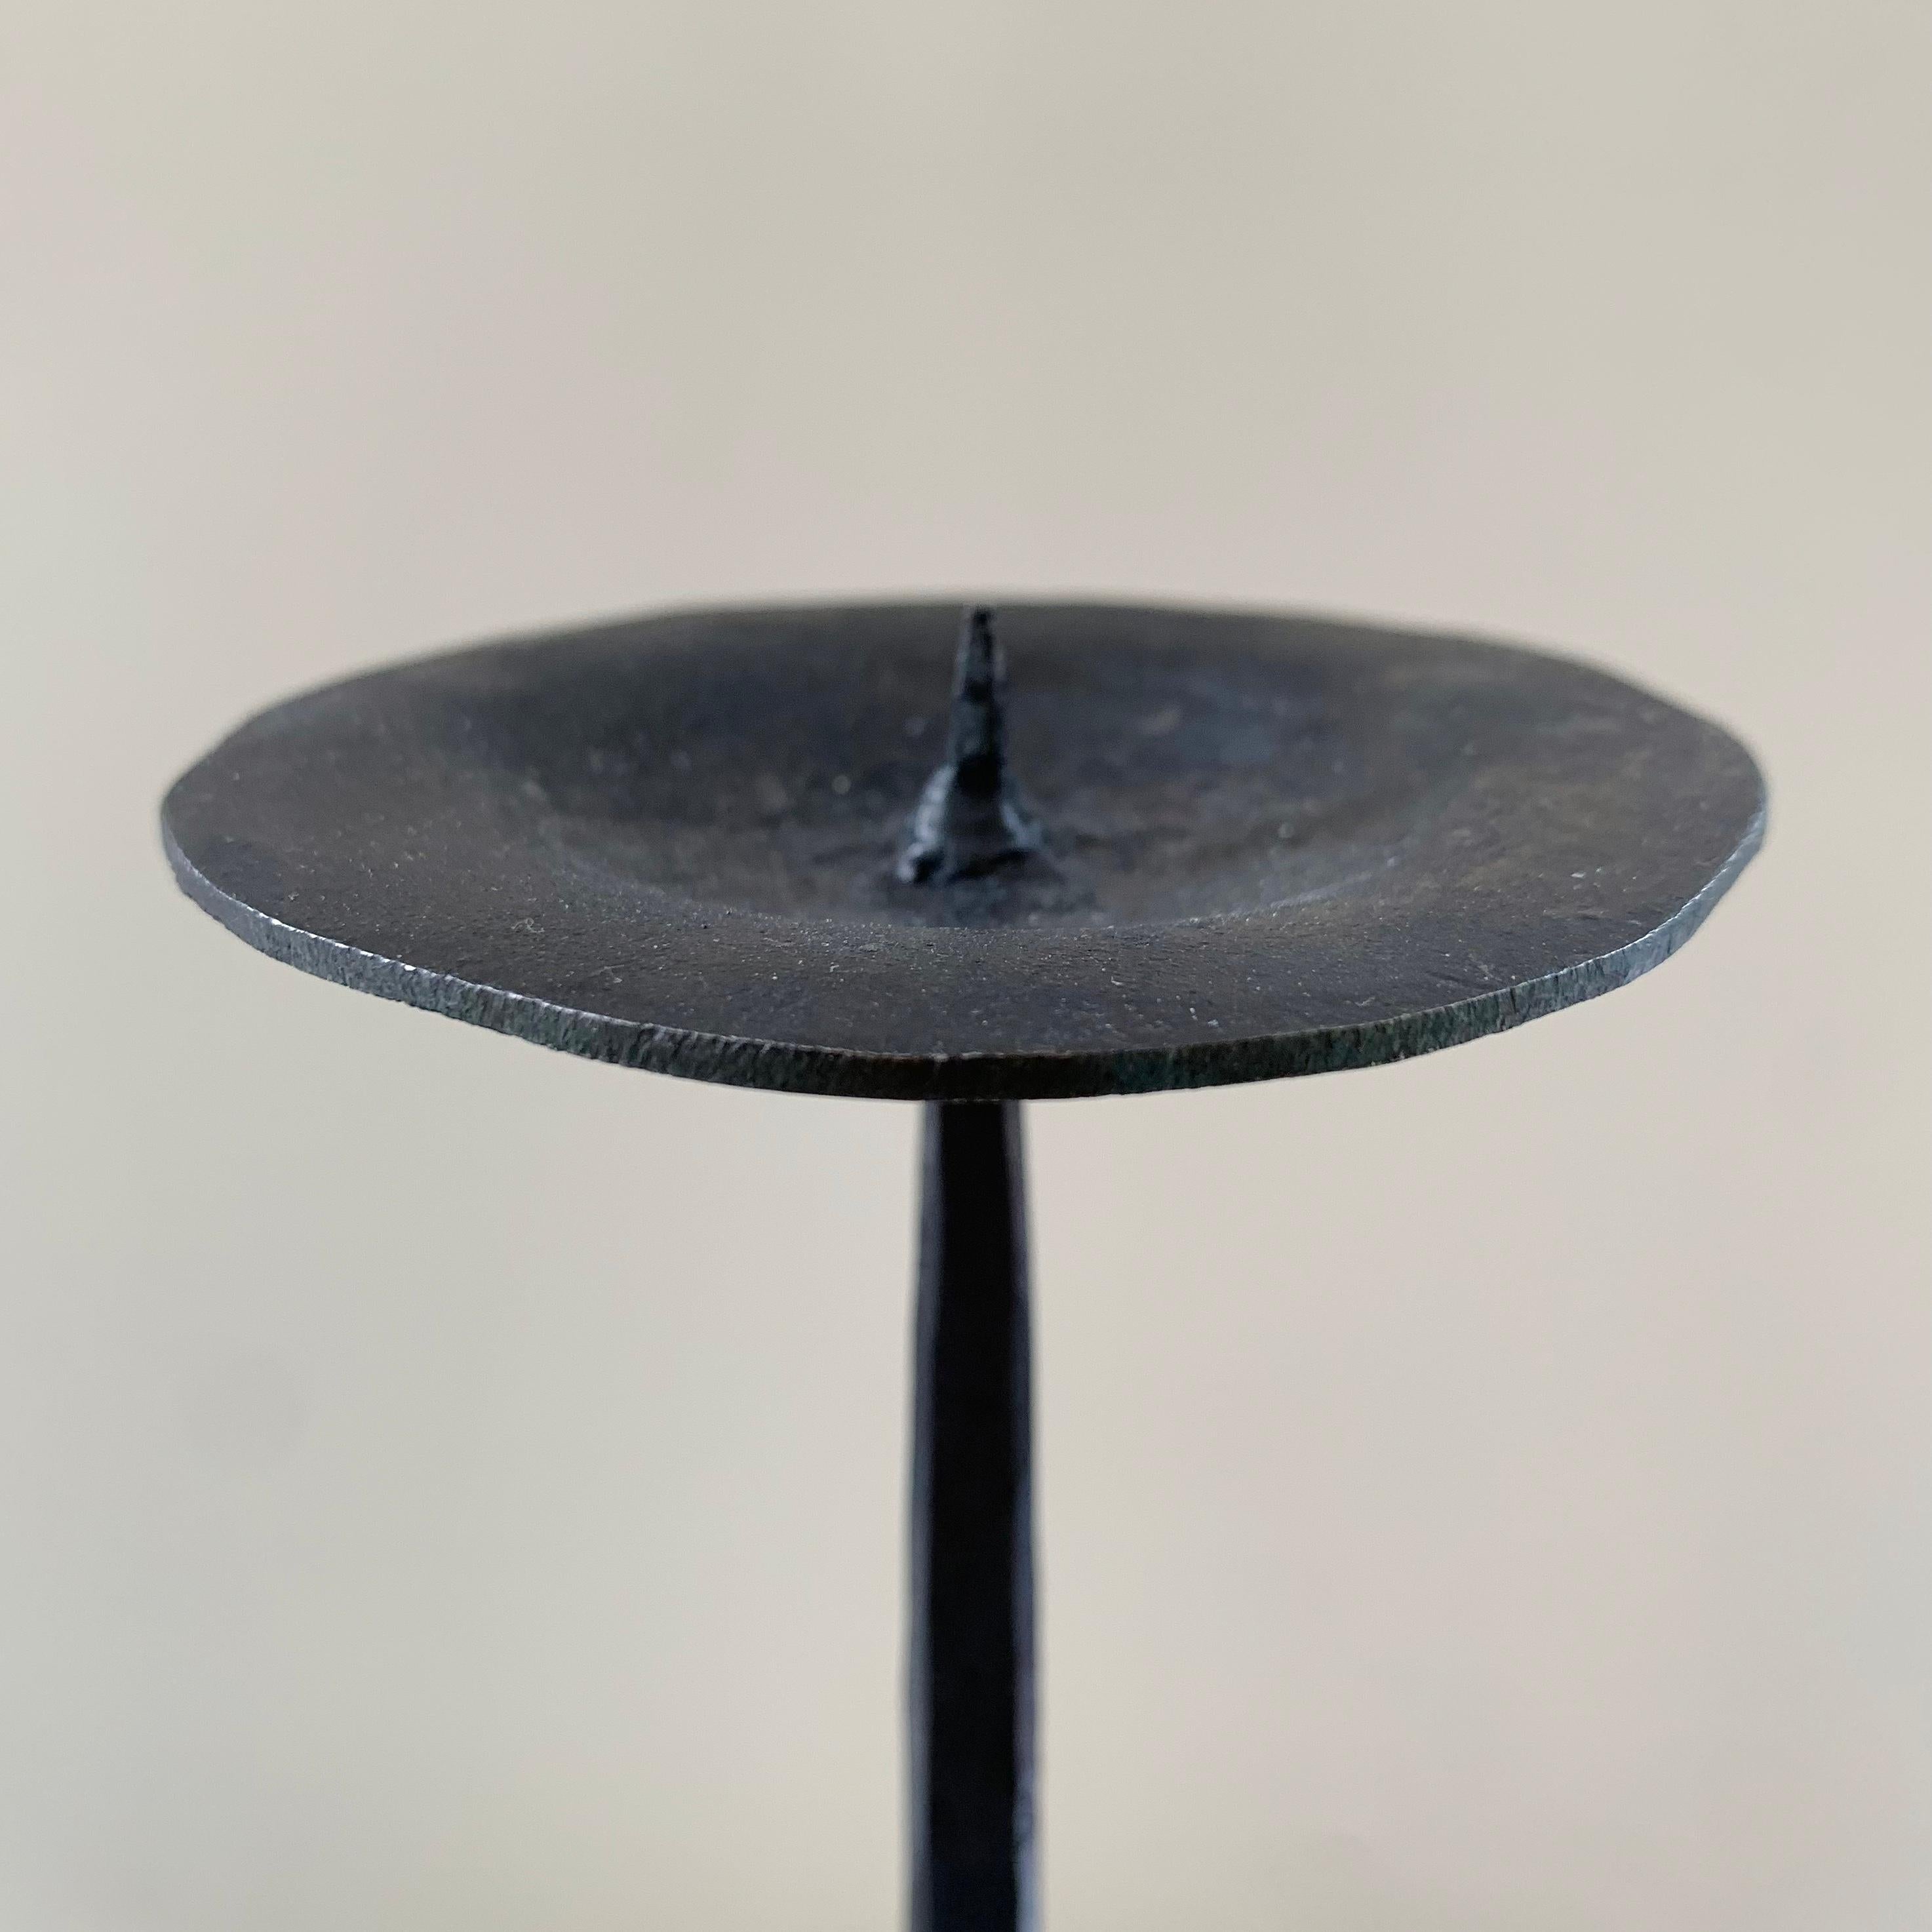 Wrought Iron Candlestick in the Style of Ateliers de Marolles, France c.1950 For Sale 6